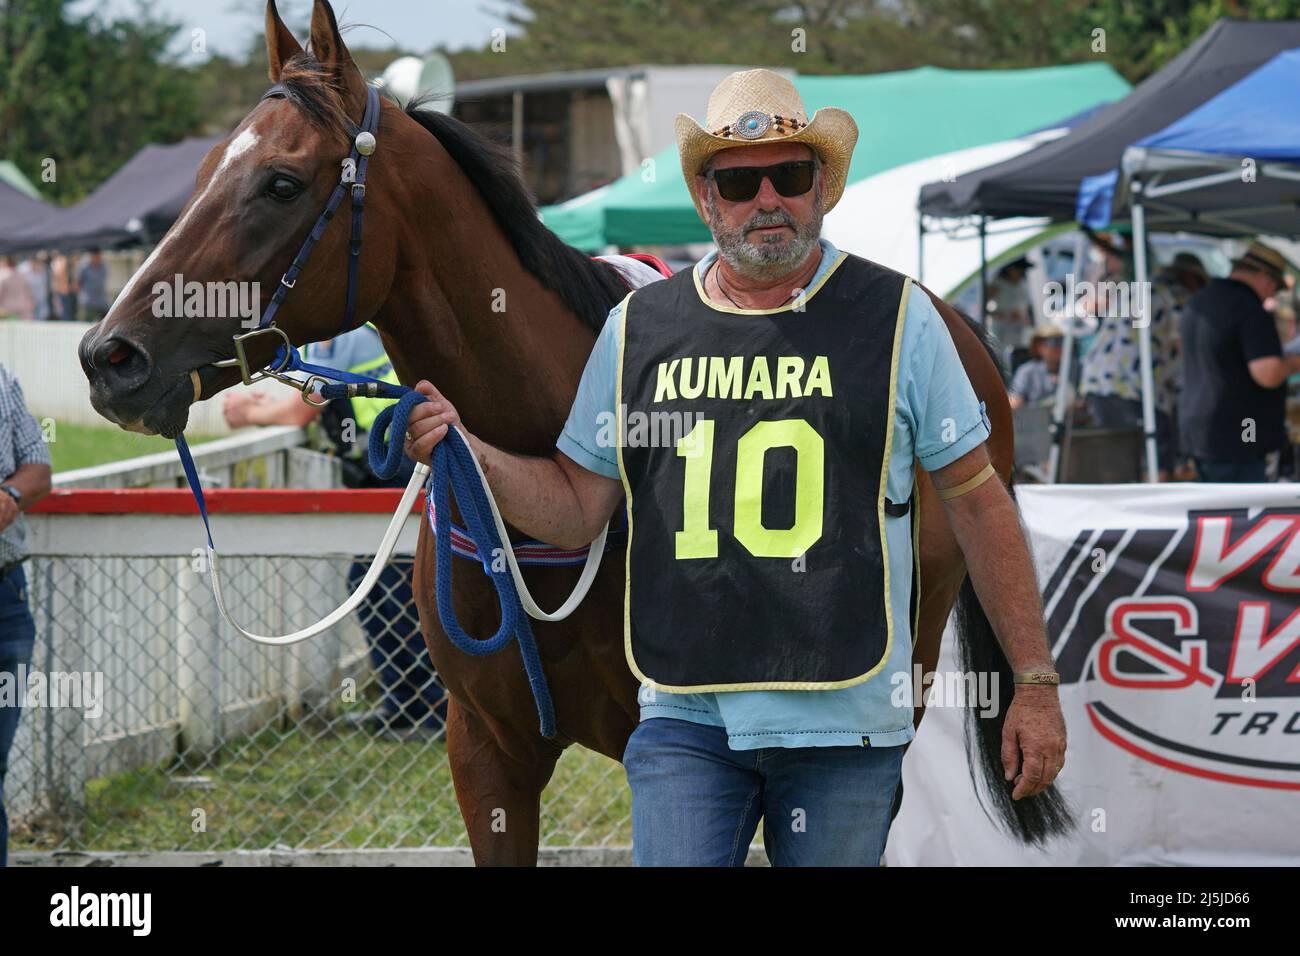 KUMARA, NEW ZEALAND, JANUARY 8, 2022; A trainer warms up his horse before a race at the Gold Nuggets competition at the Kumara Race Track, January 8, Stock Photo